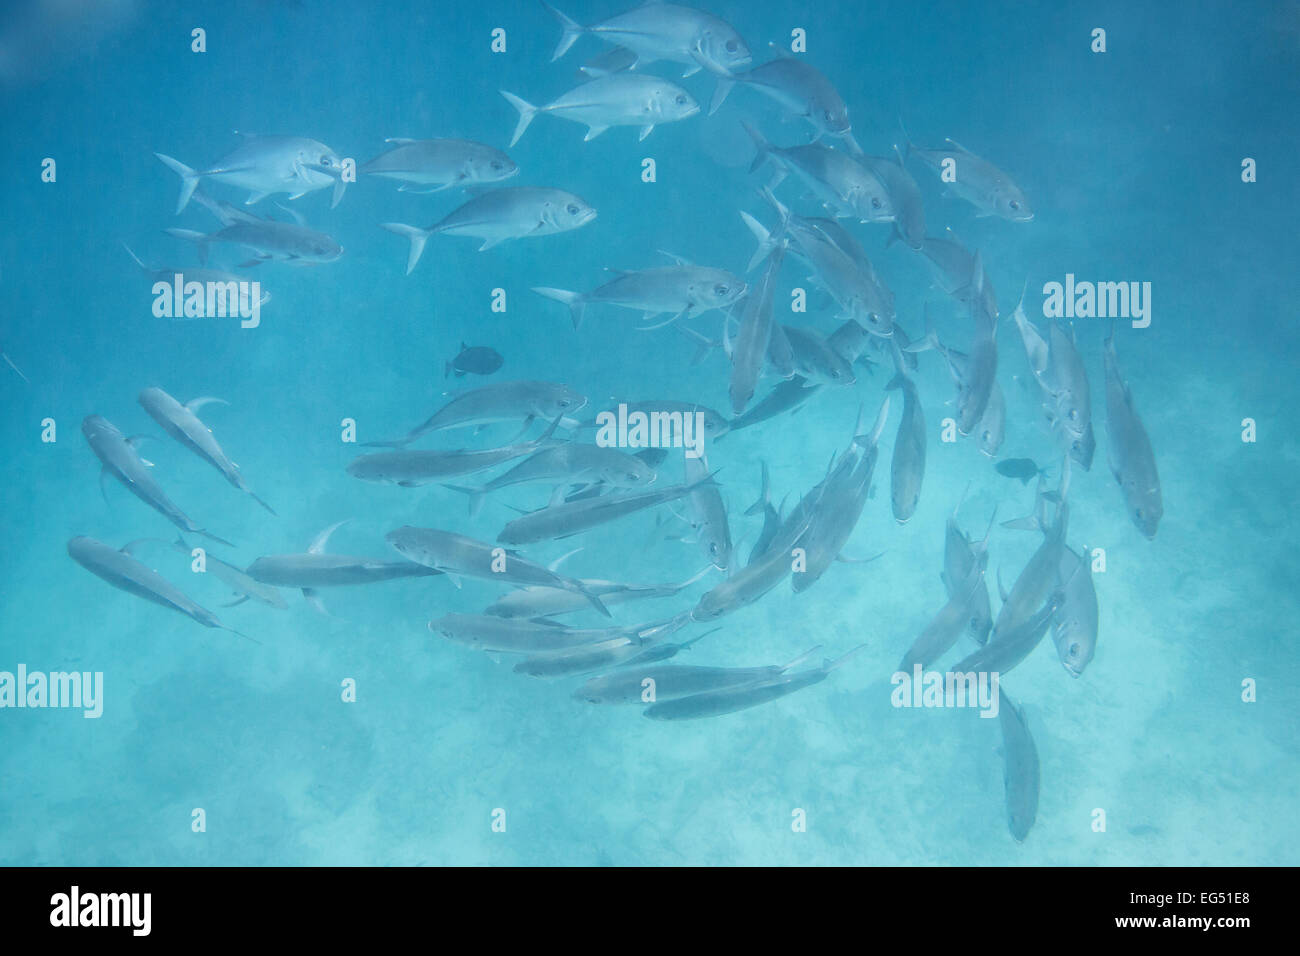 Shoal of fish in the ocean Stock Photo